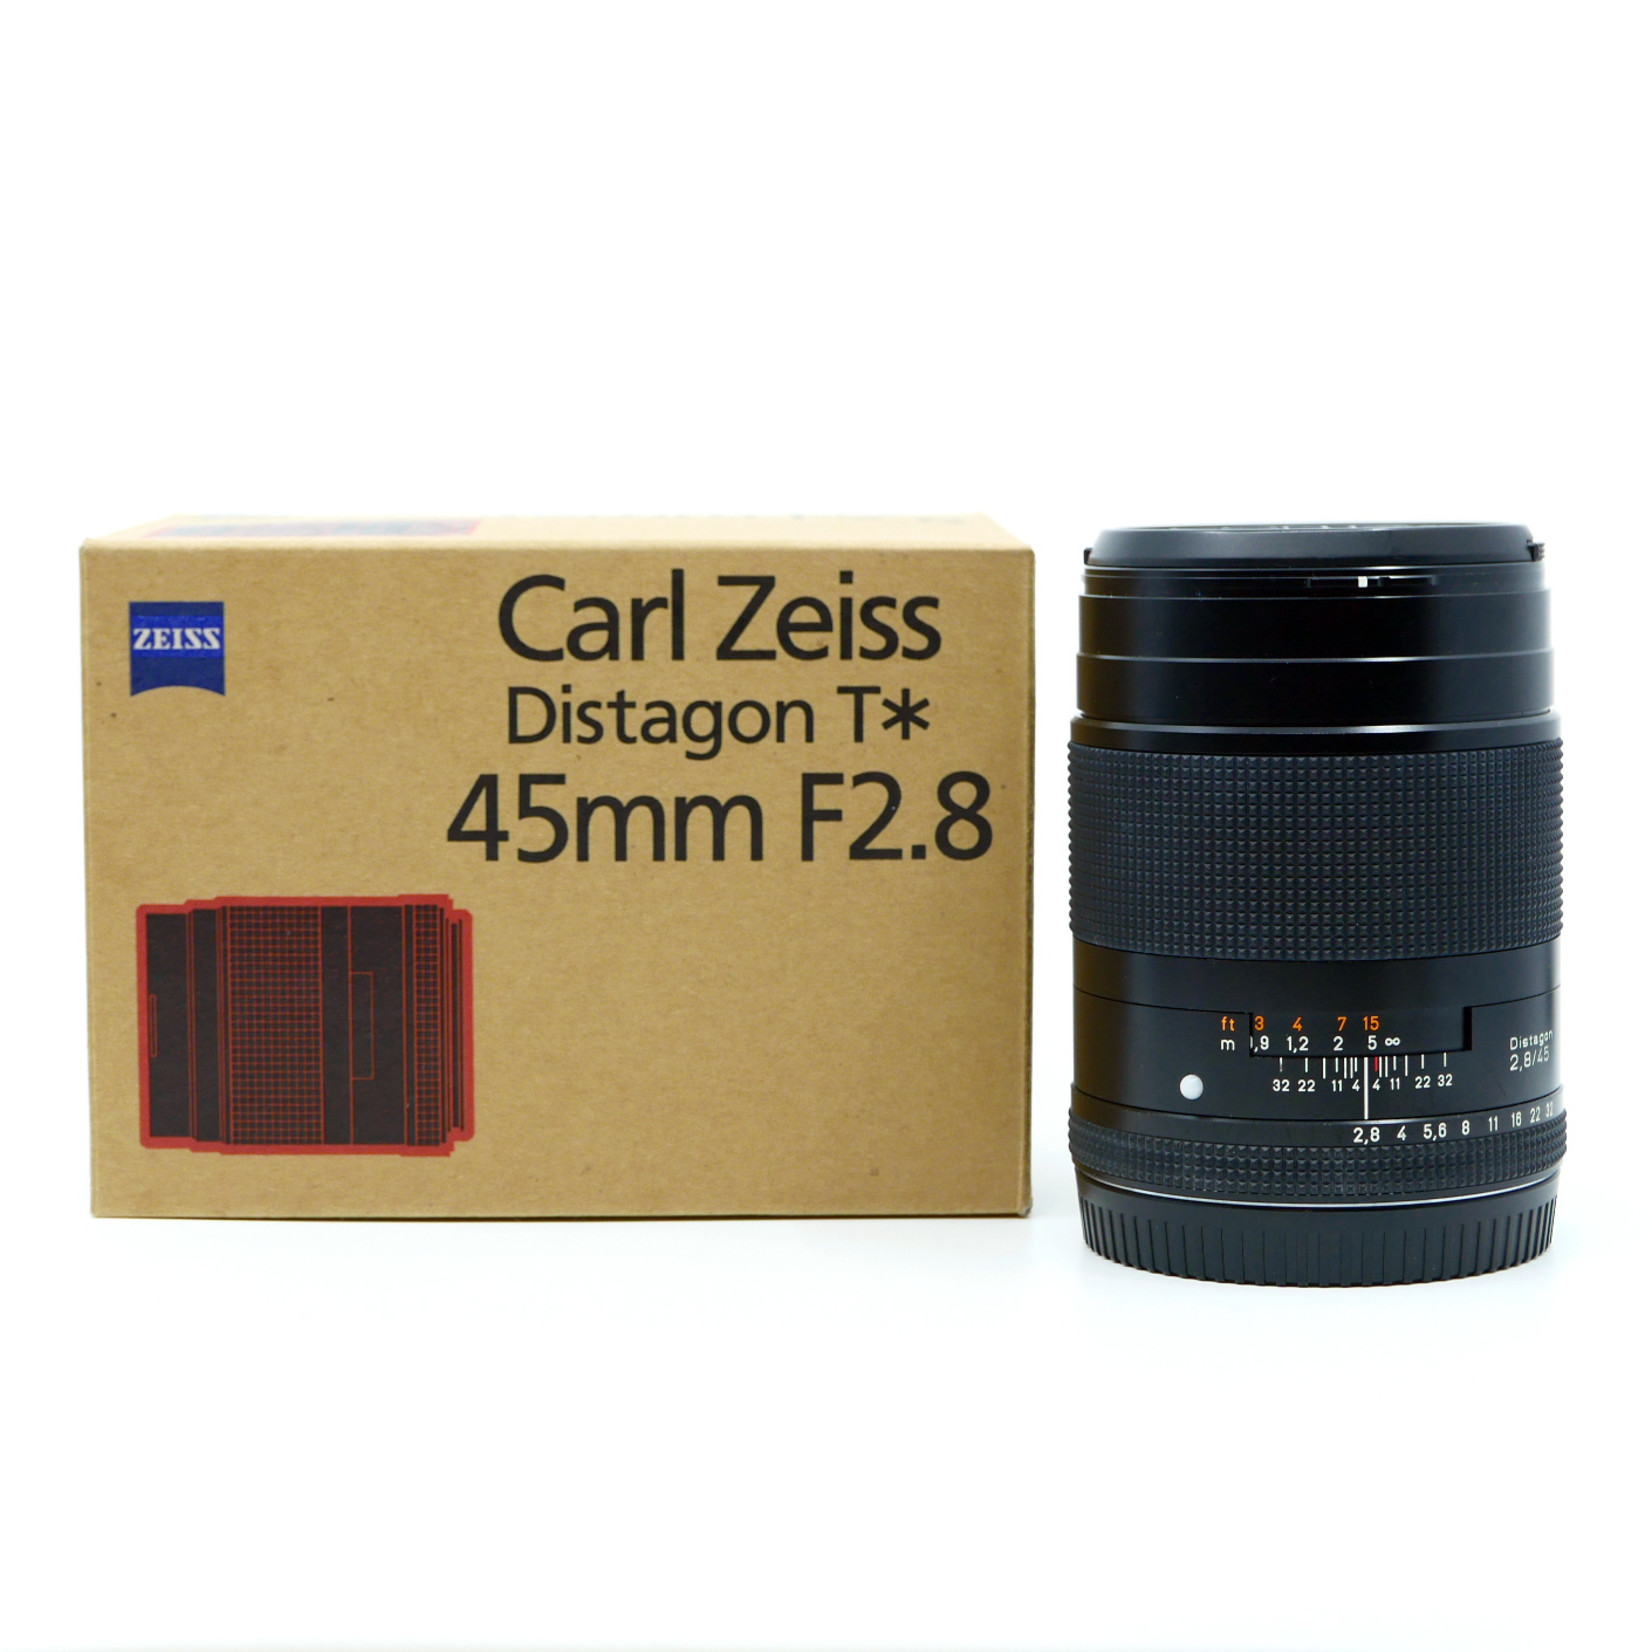 Contax Zeiss 45mm f/2.8 Distagon T* for Contax 645 (Open Box New Old Stock)